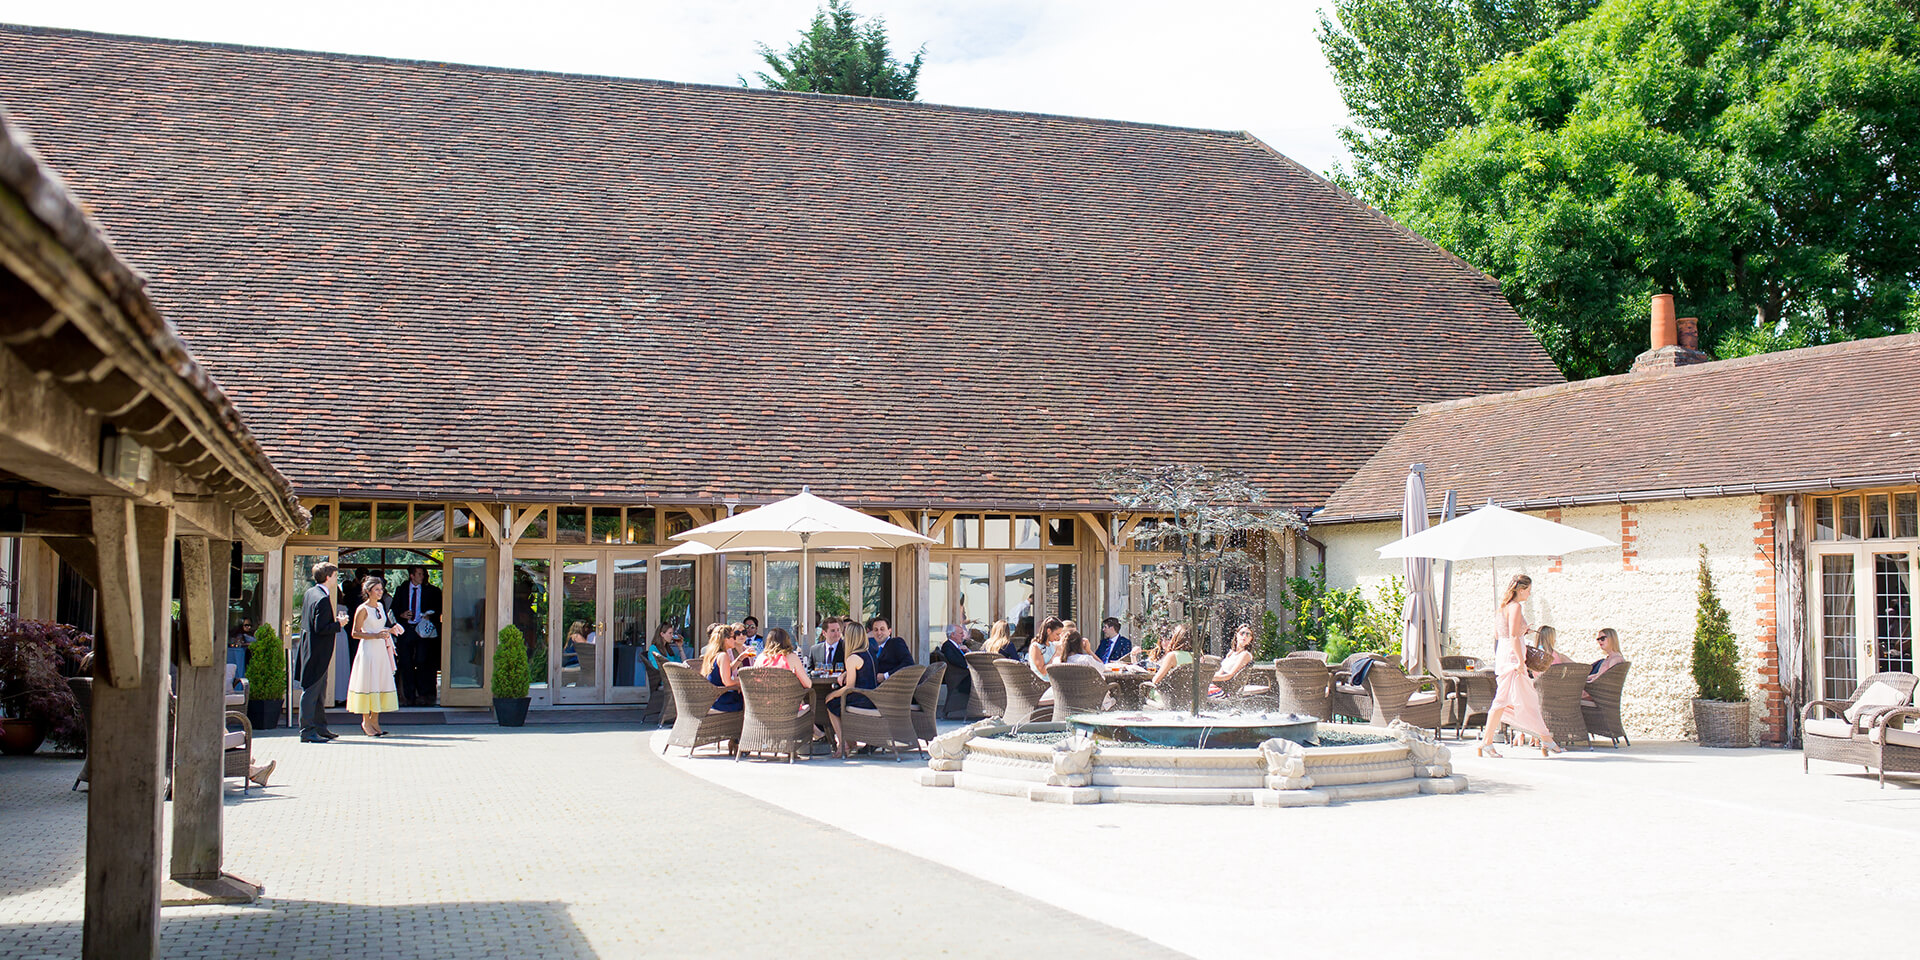 The Courtyard at Rivervale barn is the perfect place to host a drinks reception